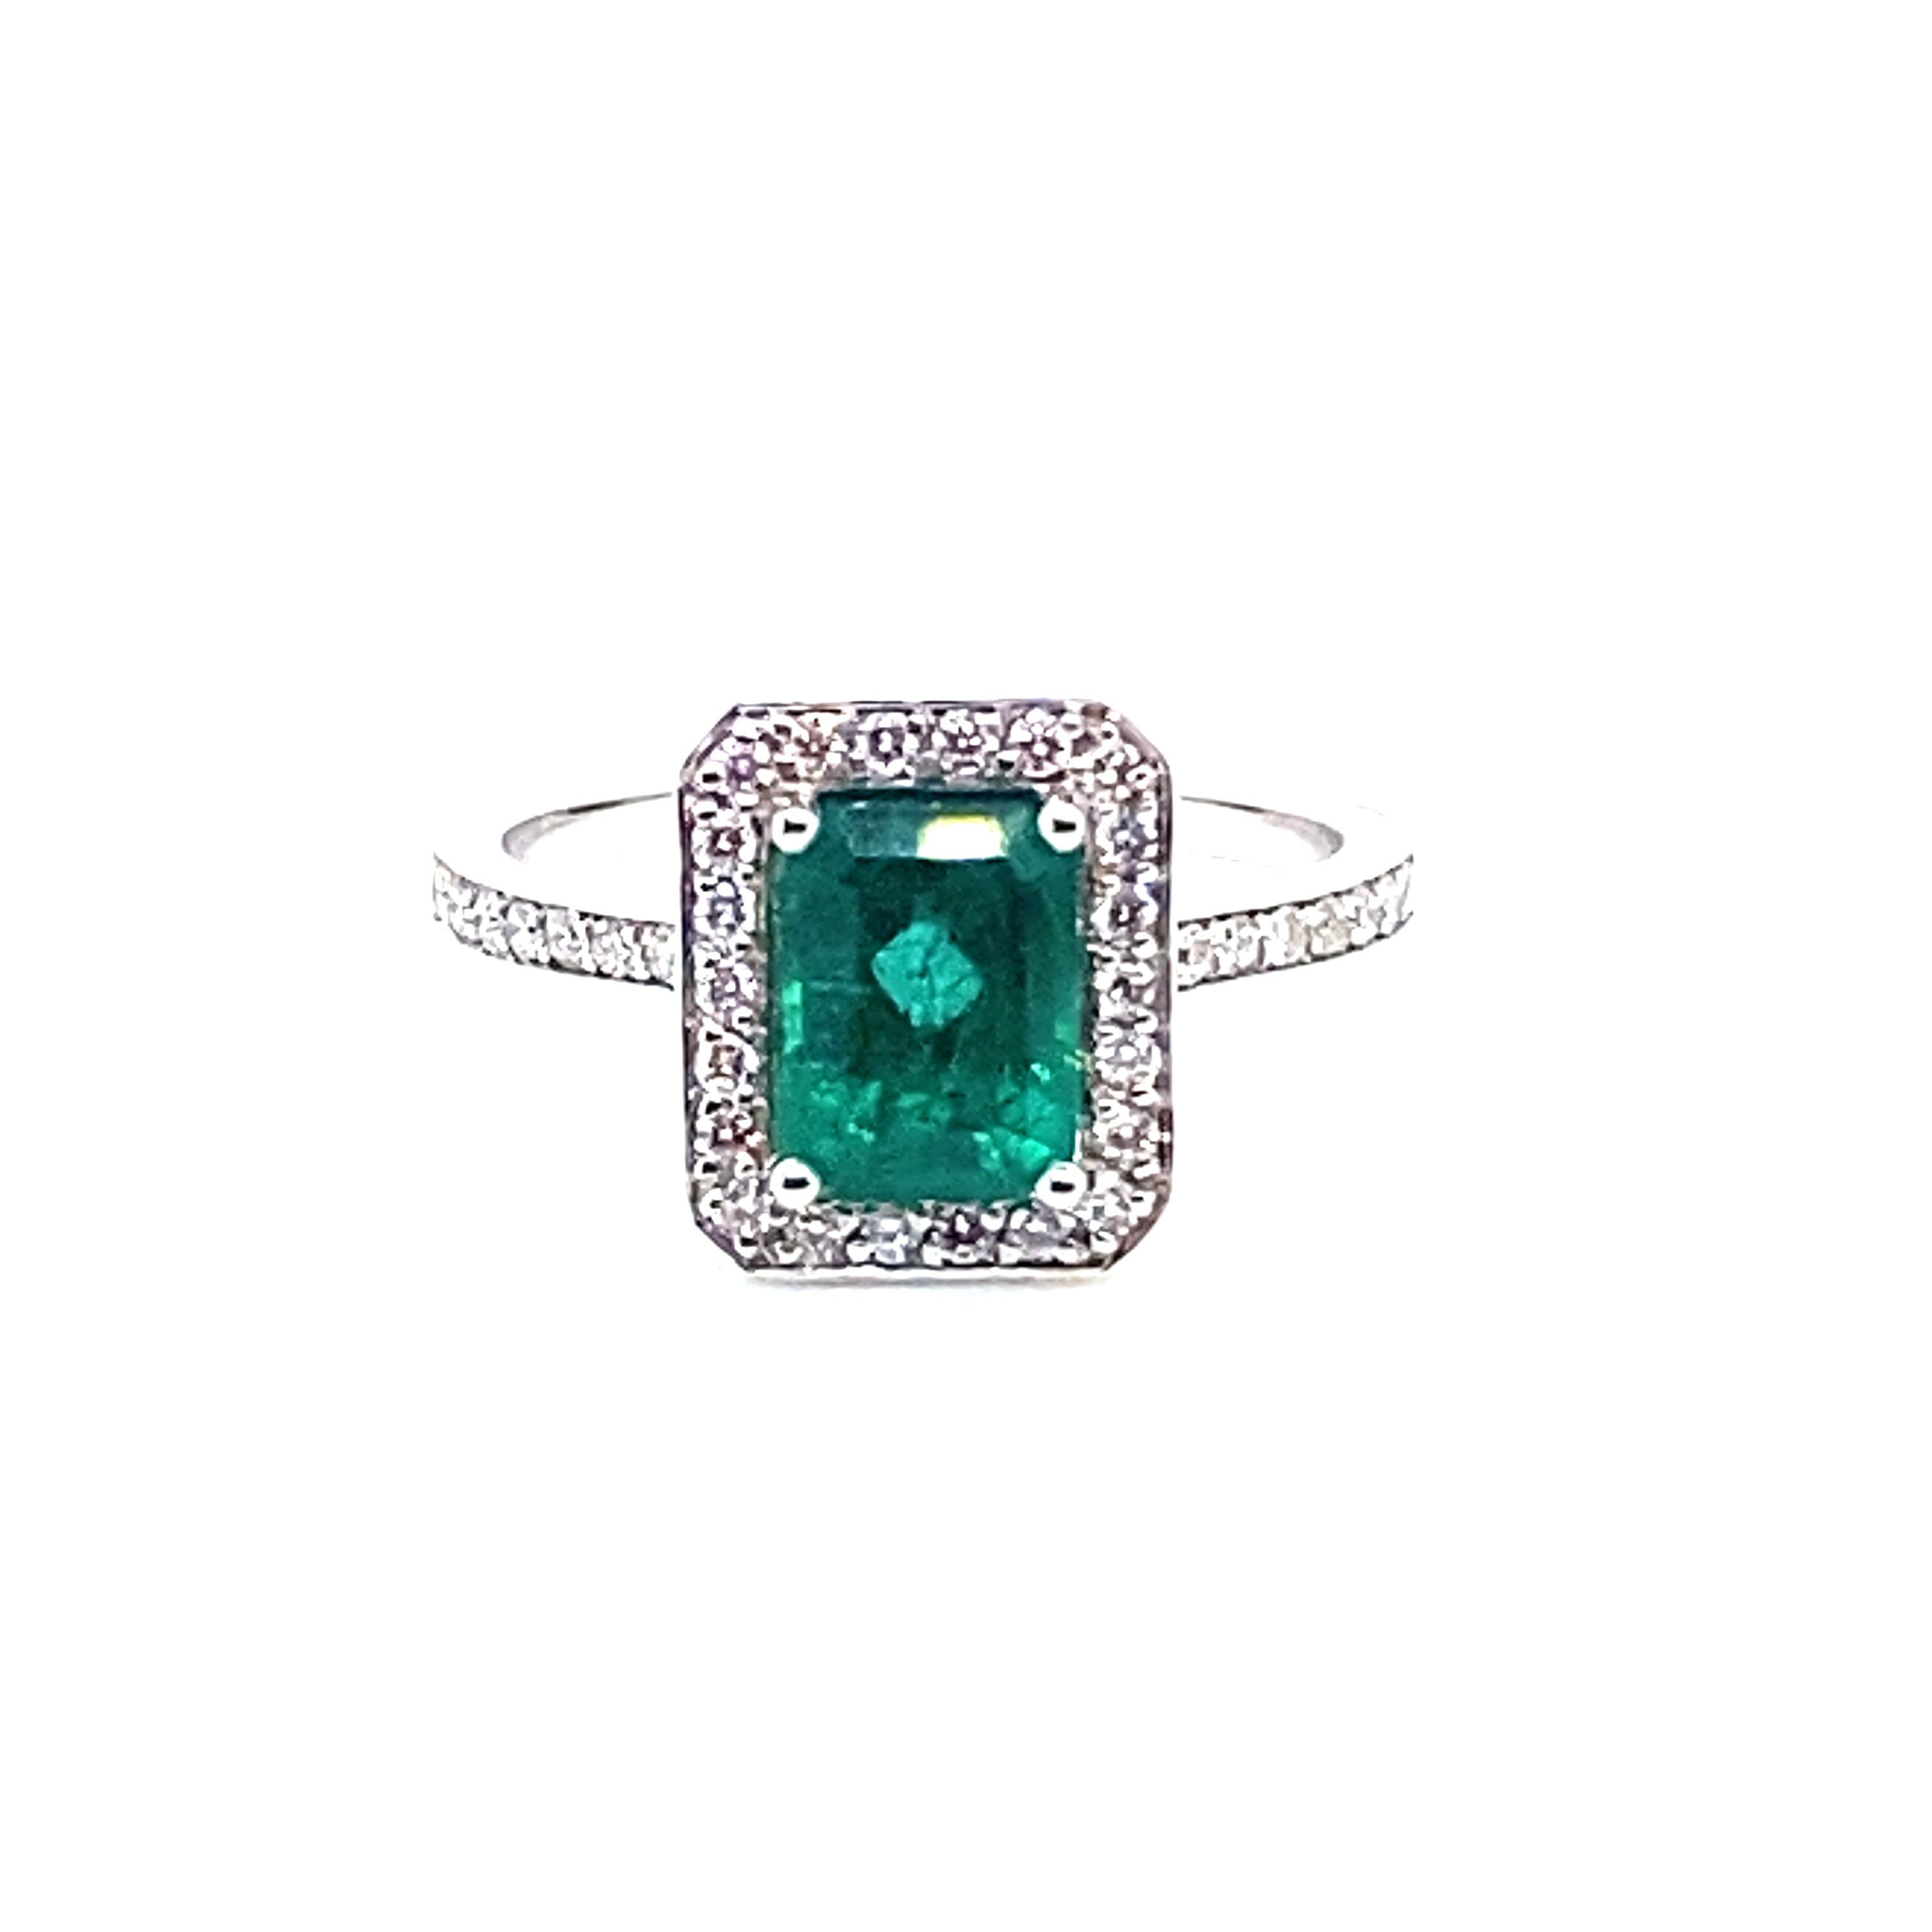 diamond ring surrounded by emeralds